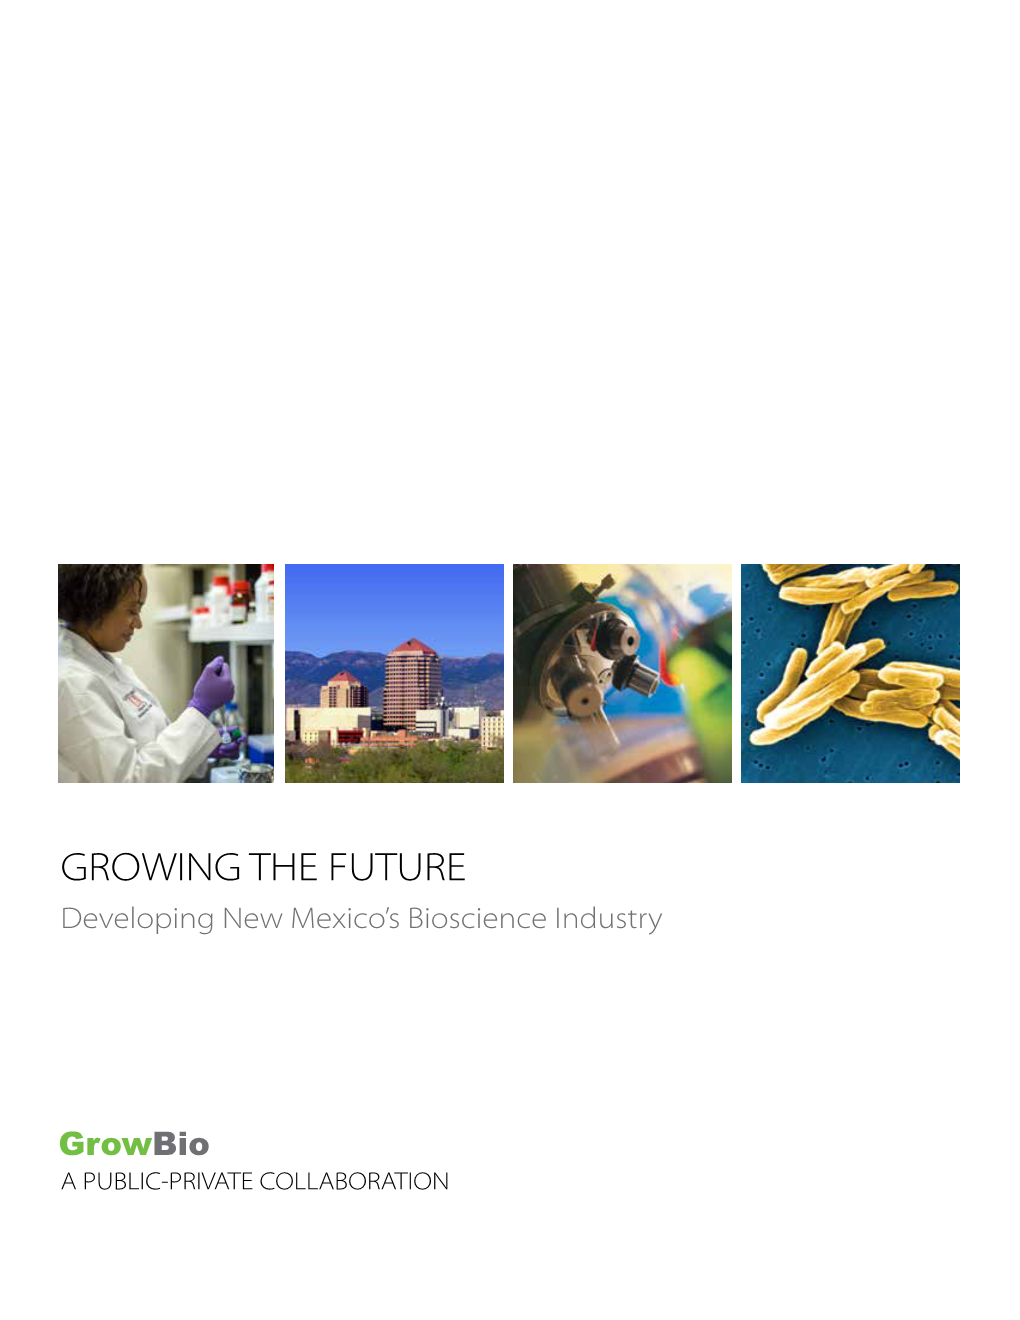 Growing the Future: Developing New Mexico's Bioscience Industry